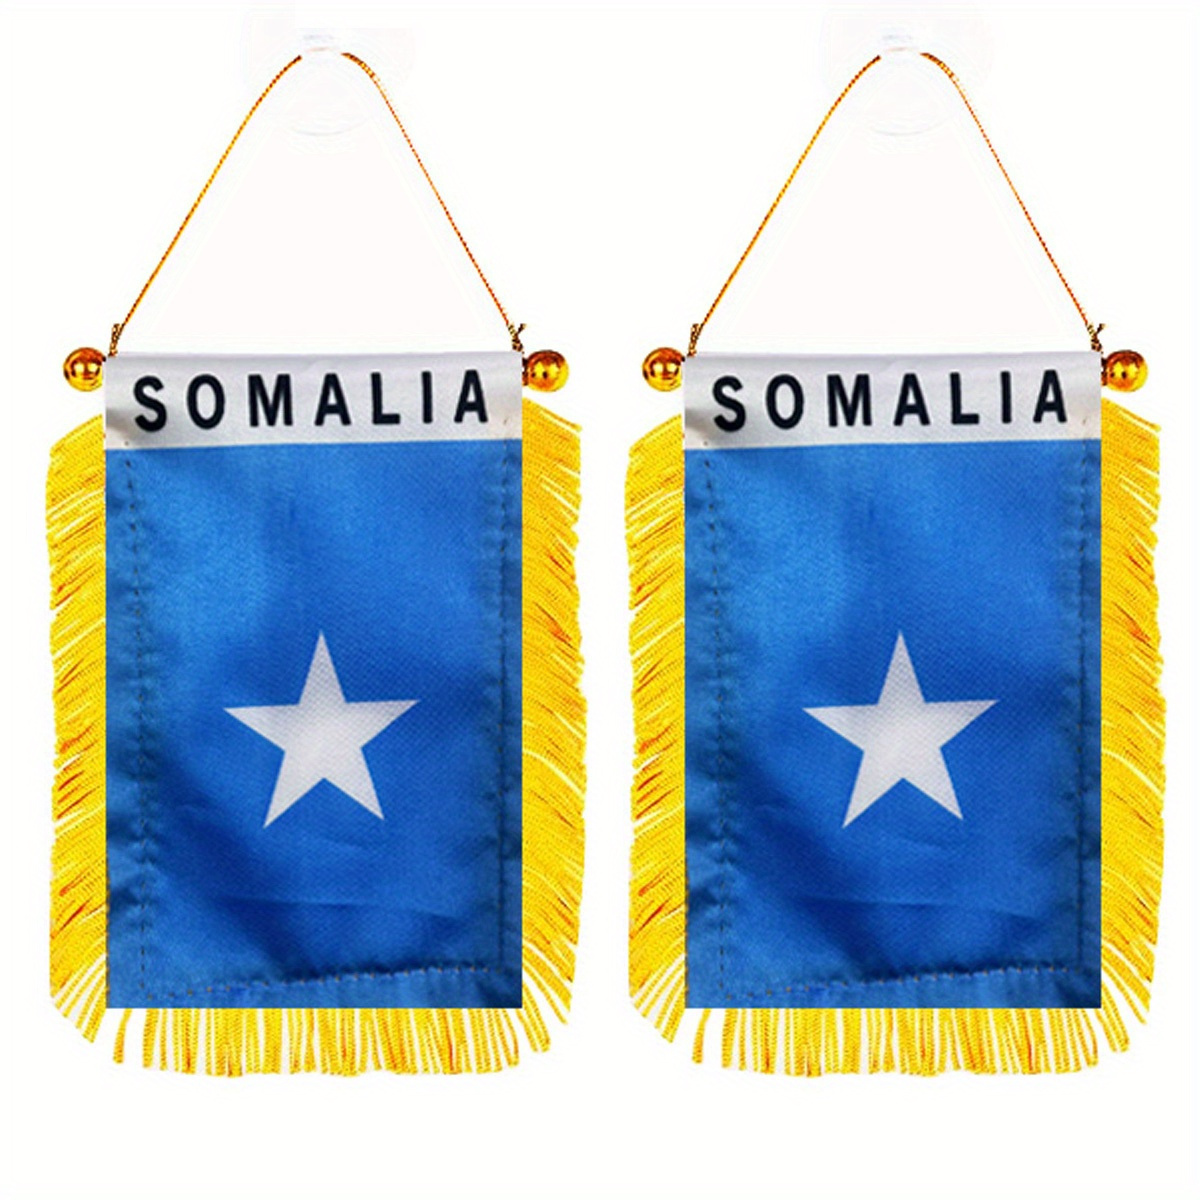 

2pcs Somalia Window Hanging Flag 3x4 Inch/8x12cm Double Side Mini Flag Banner Car Mirror Decor Fringed Hanging Flag With Suction Cup